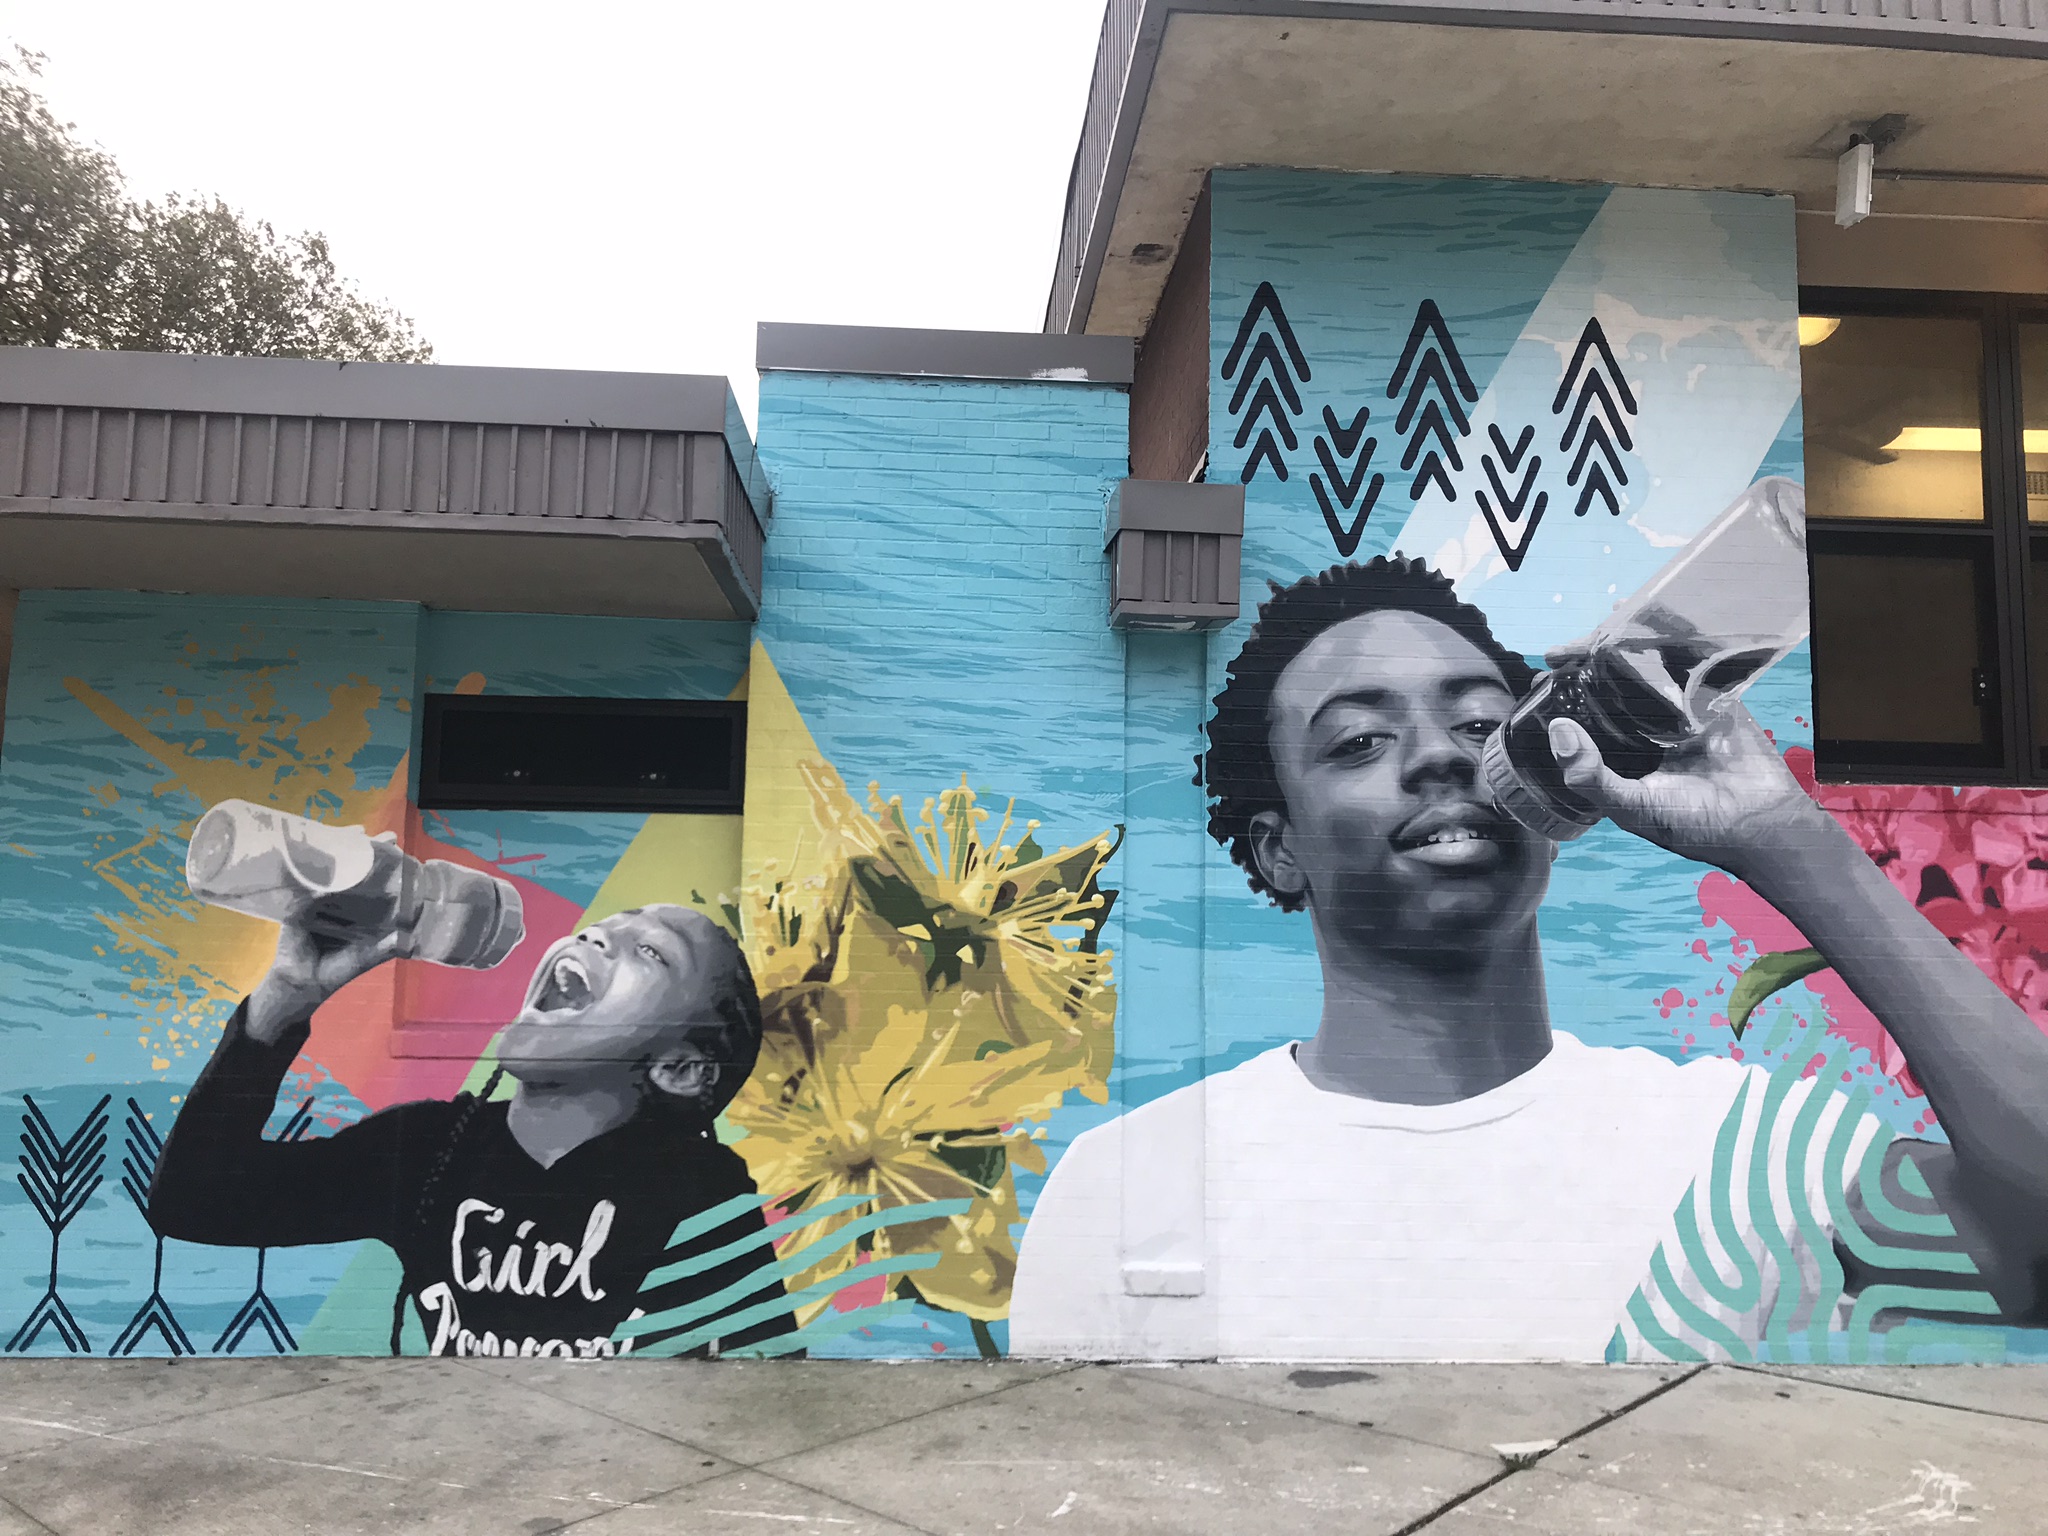 City mural depicts two young people enjoying drinking from reusable water bottles